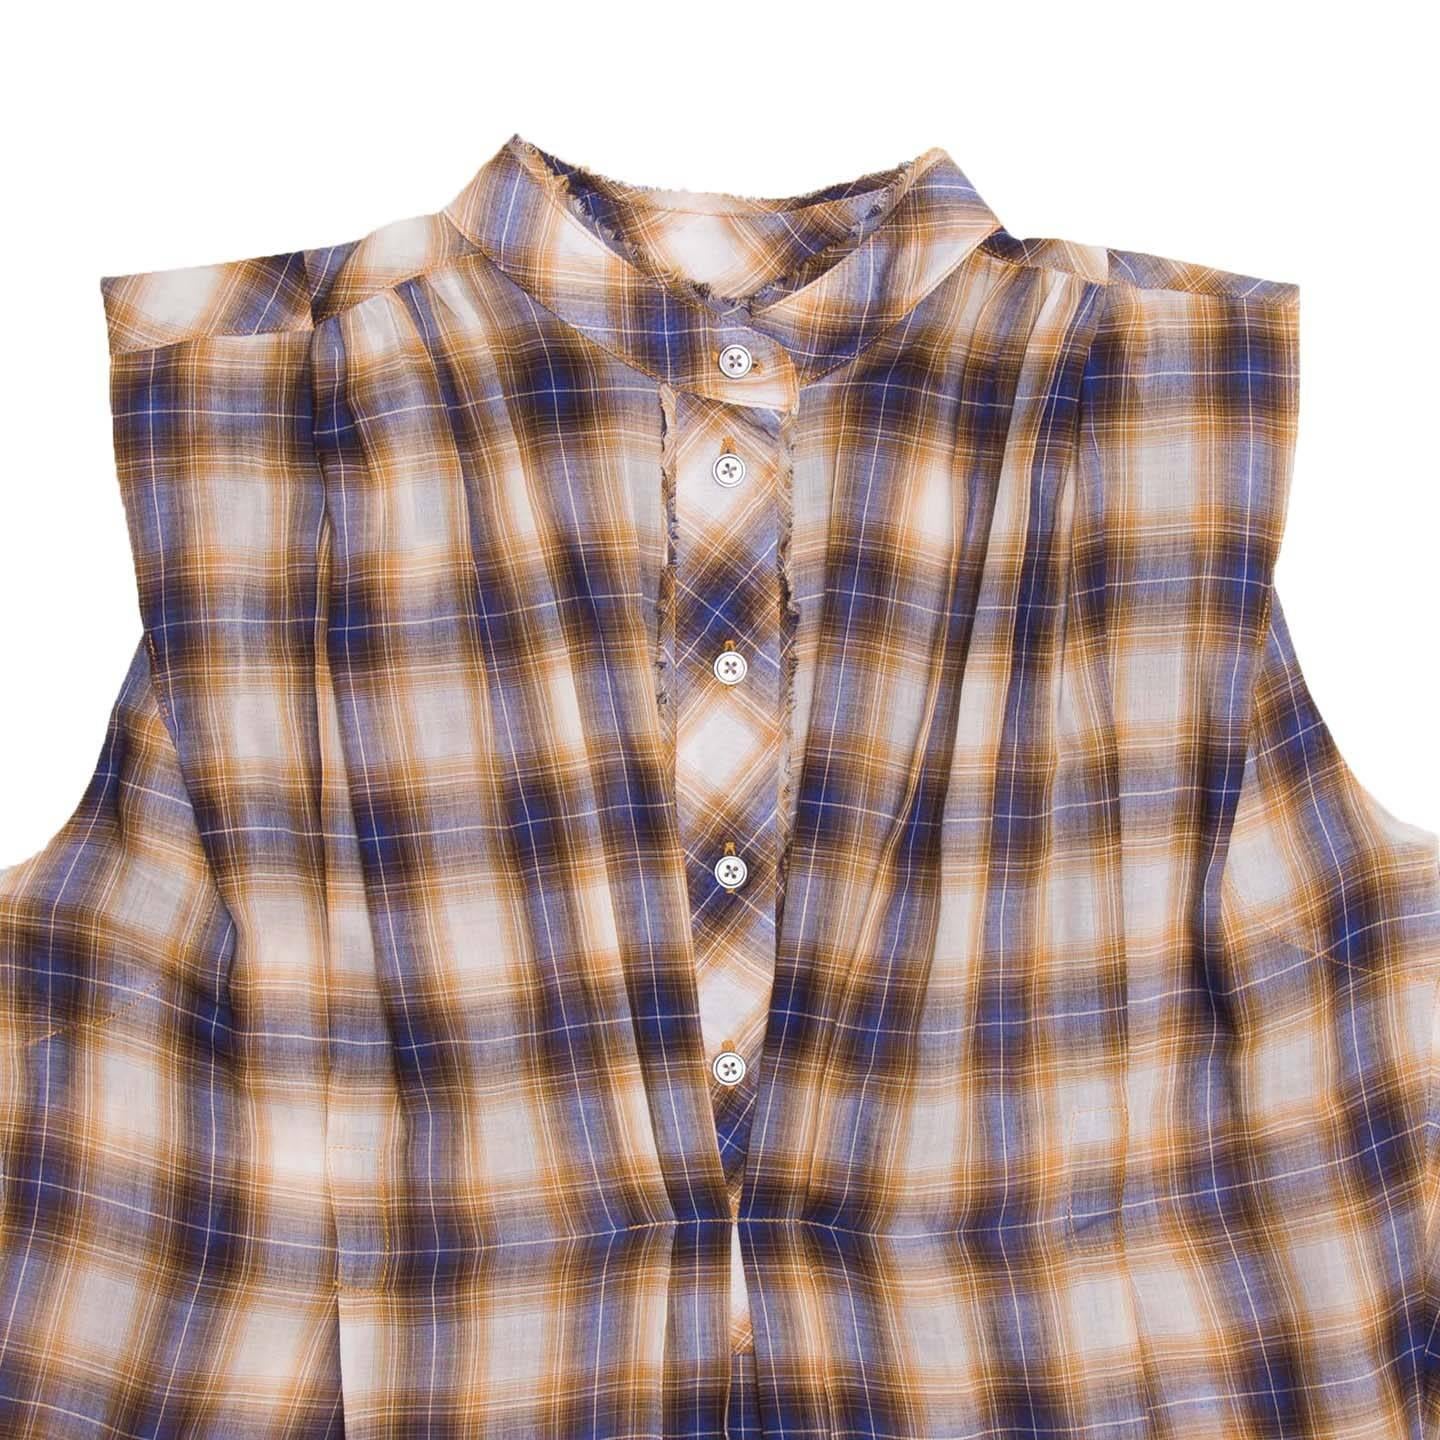 Marc Jacobs Gold & Blue Plaid Cotton Shirt In New Condition For Sale In Brooklyn, NY